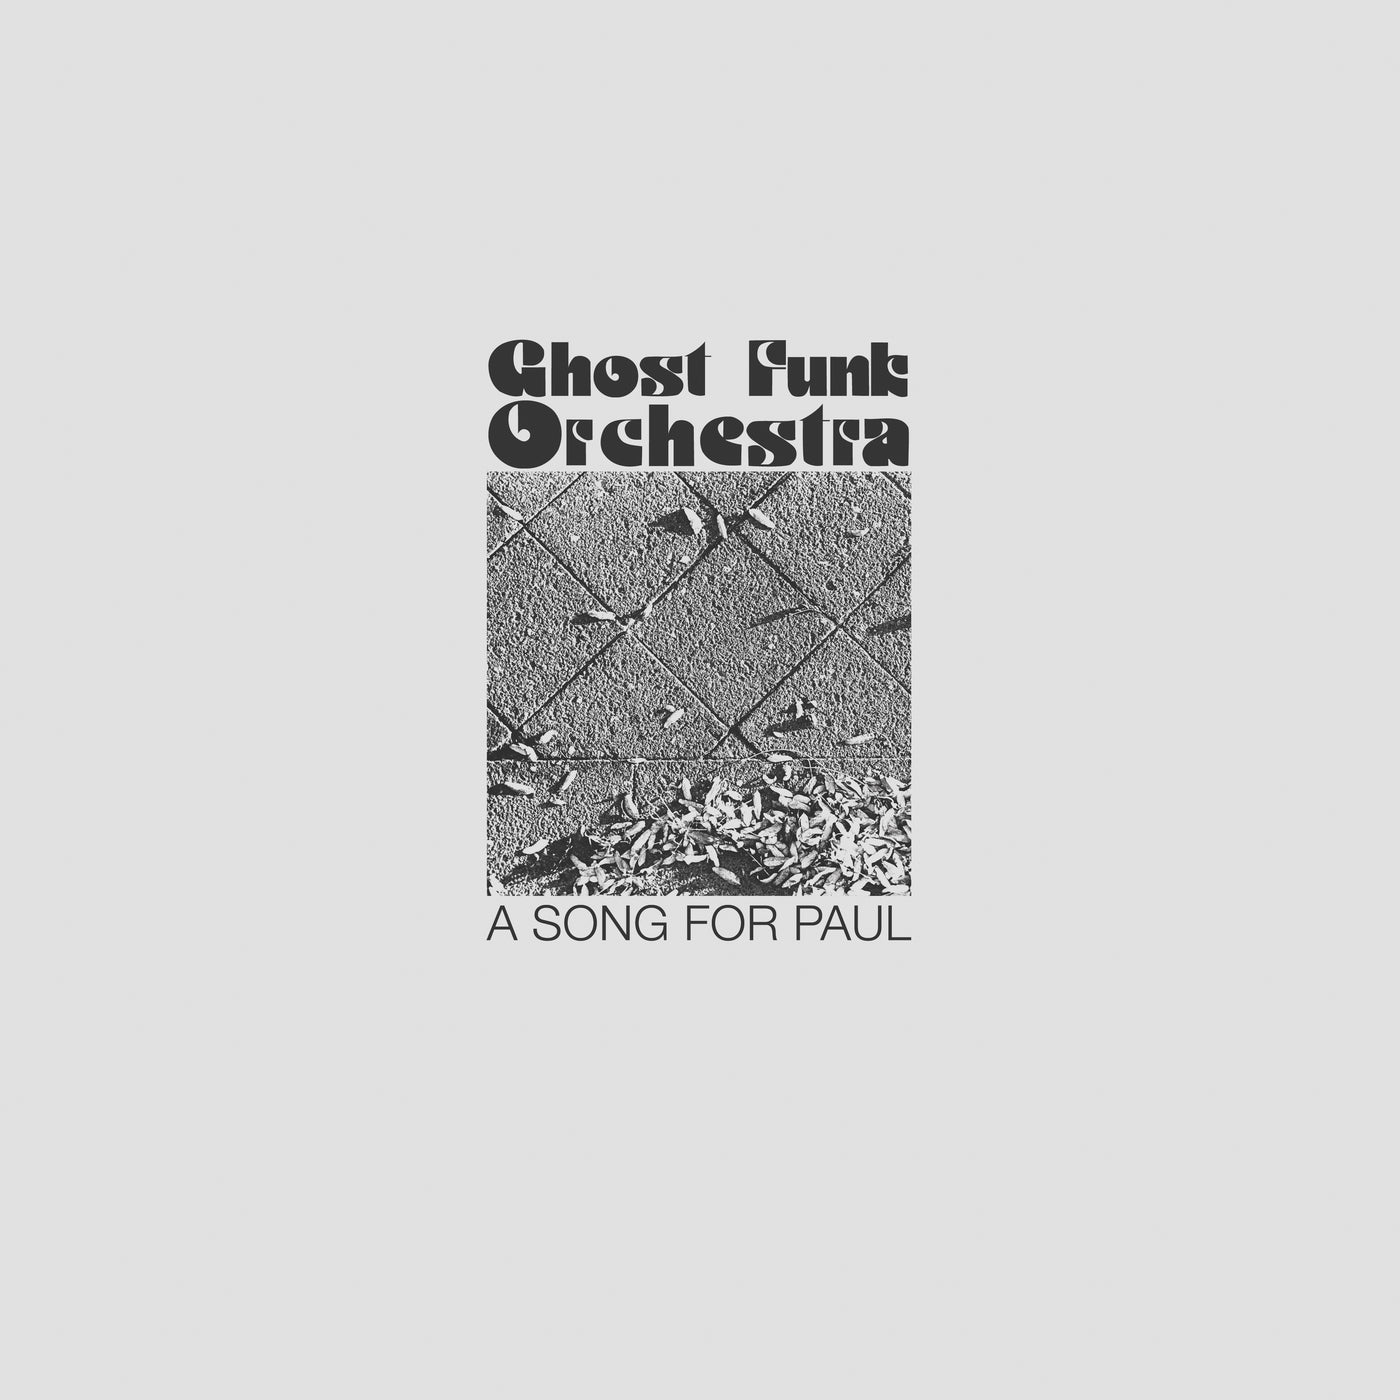 Ghost Funk Orchestra - A Song For Paul [Grass Green Vinyl LP]